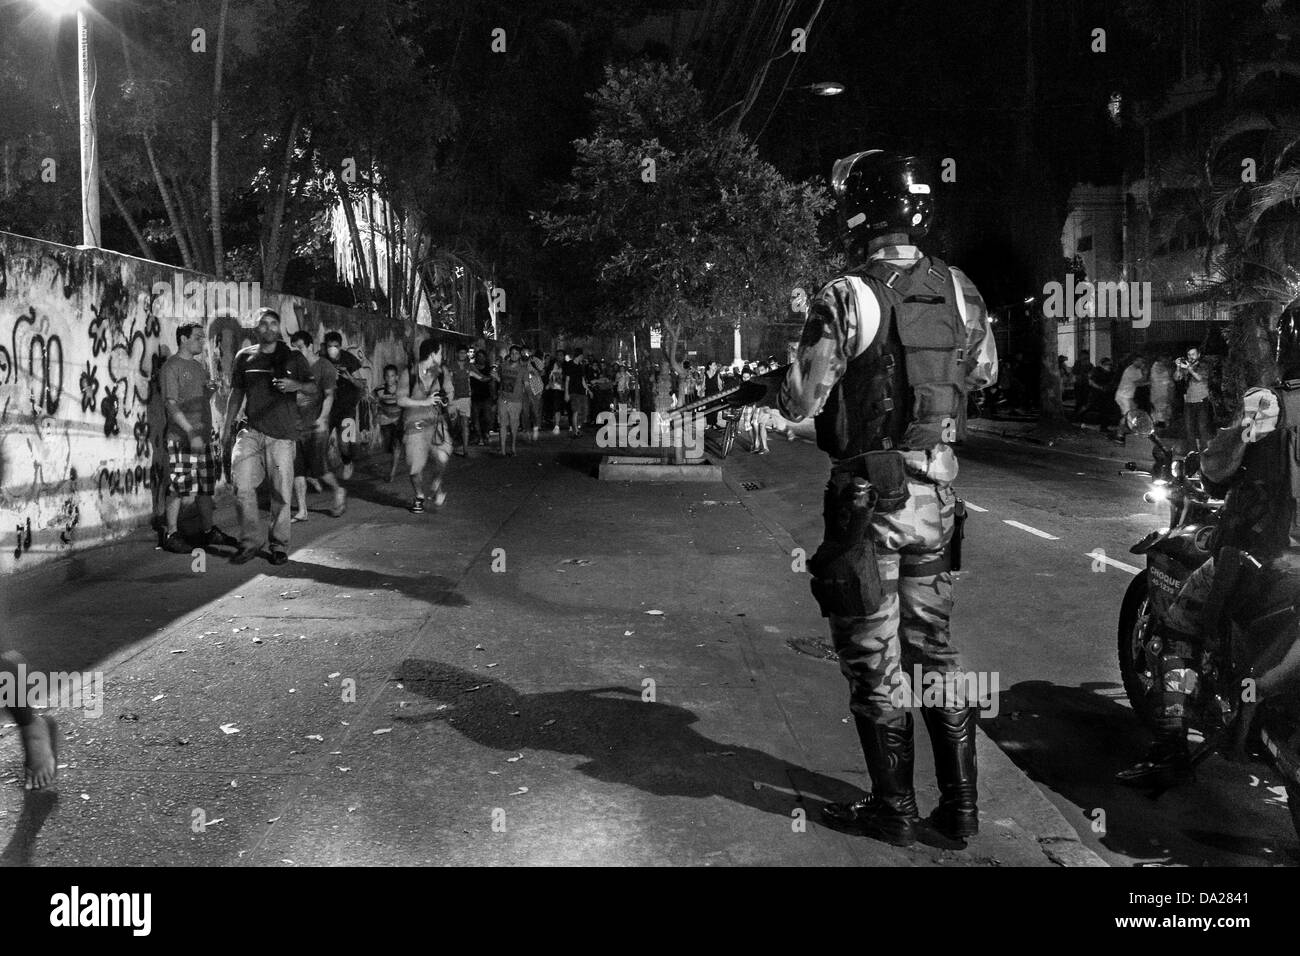 Military police in protest during the FIFA Confederations Cup 2013 in Rio de Janeiro Stock Photo